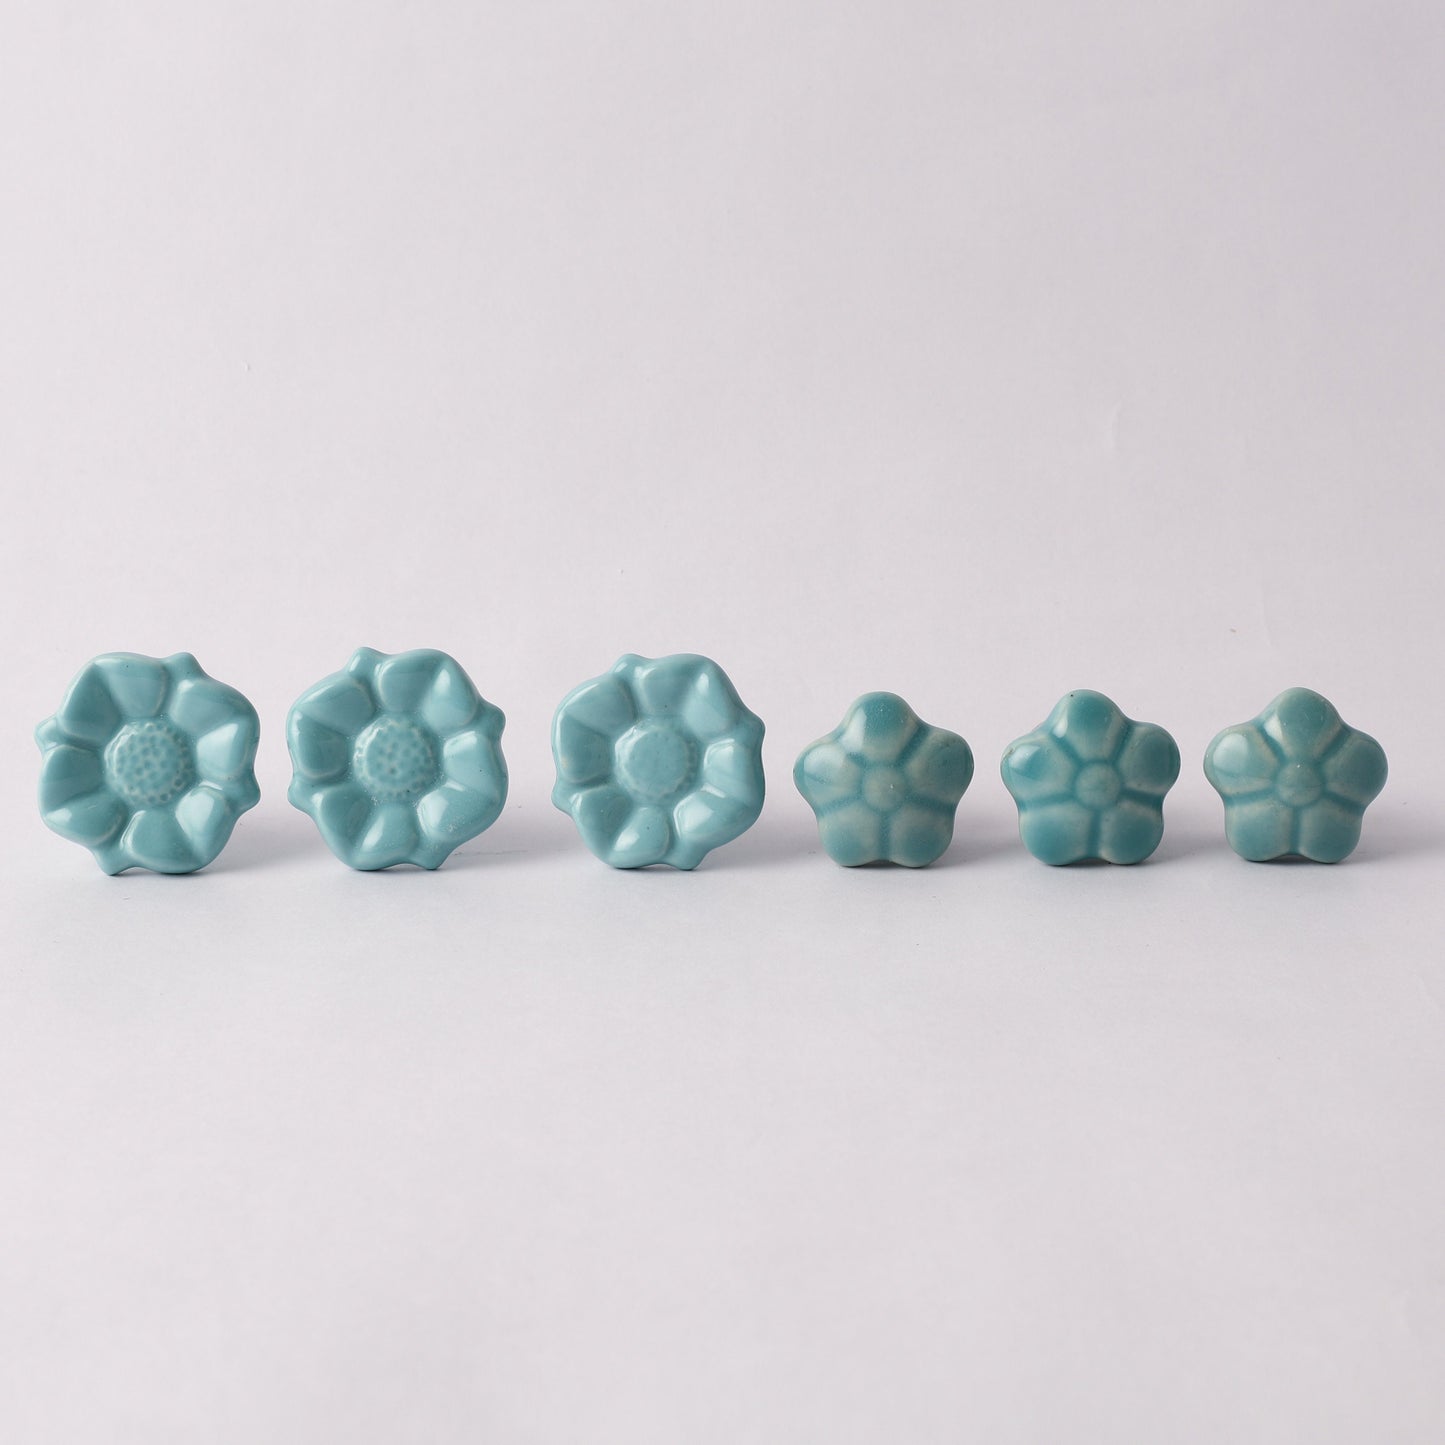 Teal Floral Style Ceramic Pull Knobs (C10)